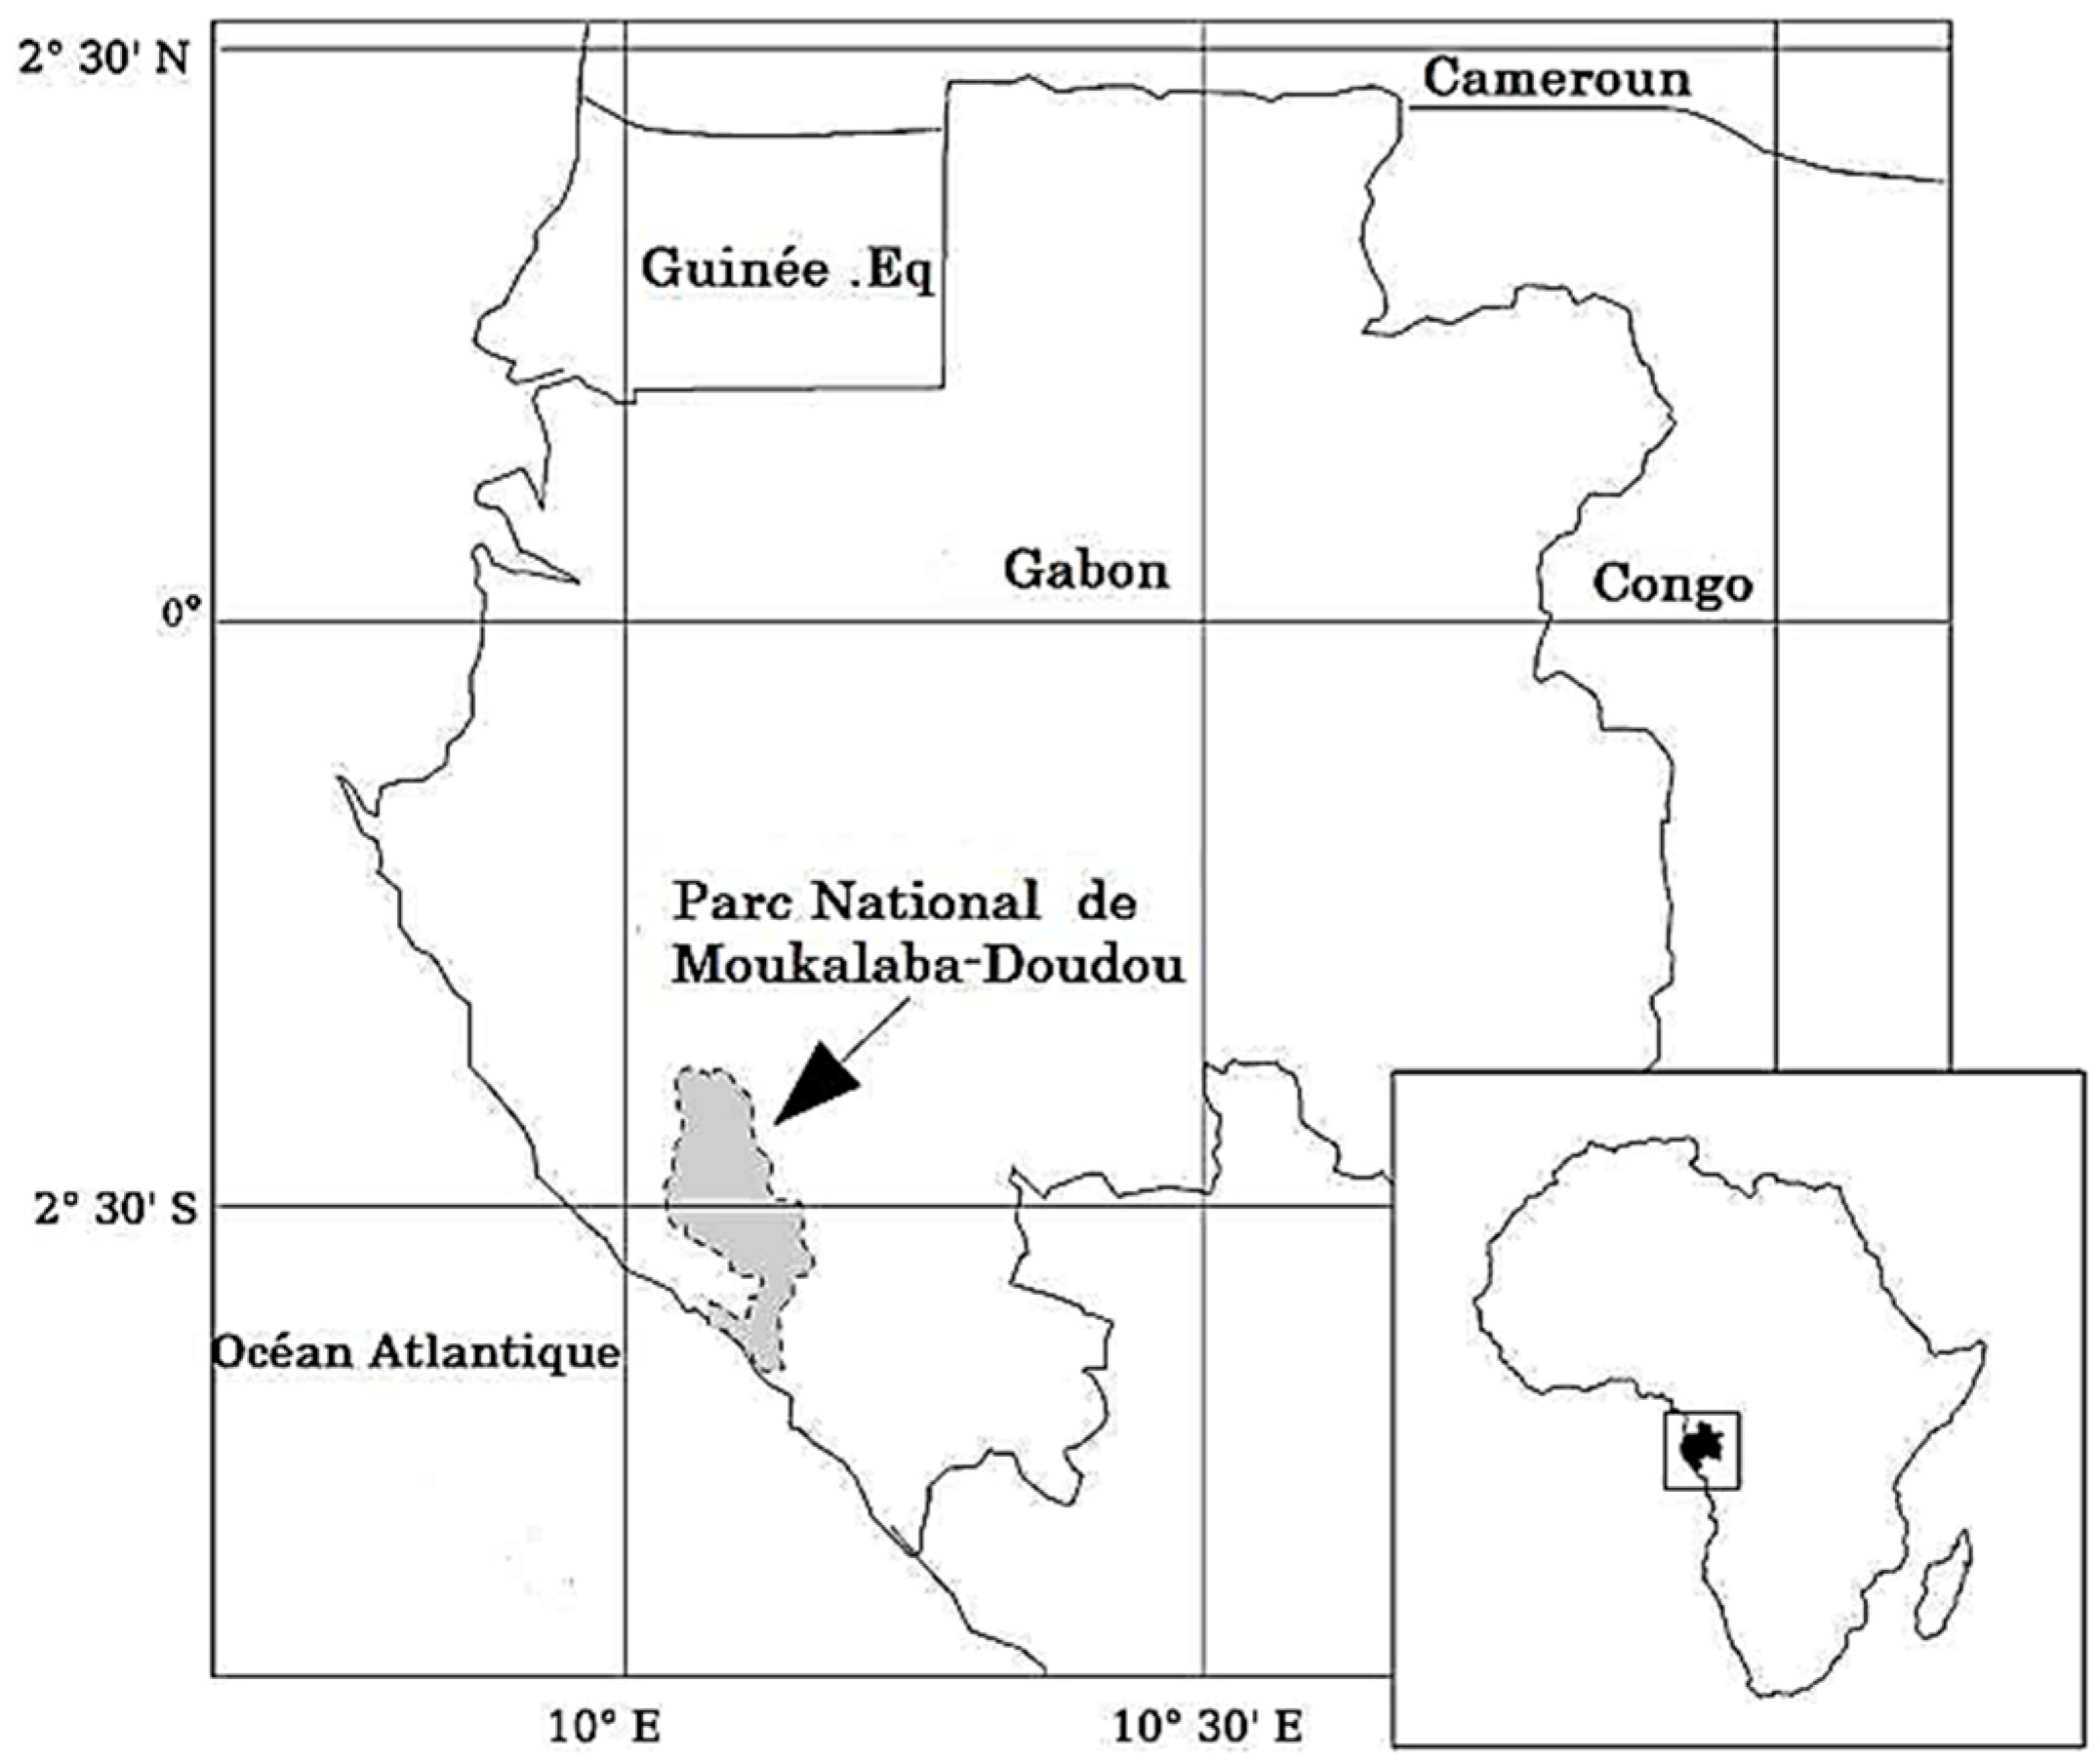 Pathogens | Free Full-Text | Phylogenetic Groups, Pathotypes and  Antimicrobial Resistance of Escherichia coli Isolated from Western Lowland  Gorilla Faeces (Gorilla gorilla gorilla) of Moukalaba-Doudou National Park  (MDNP)